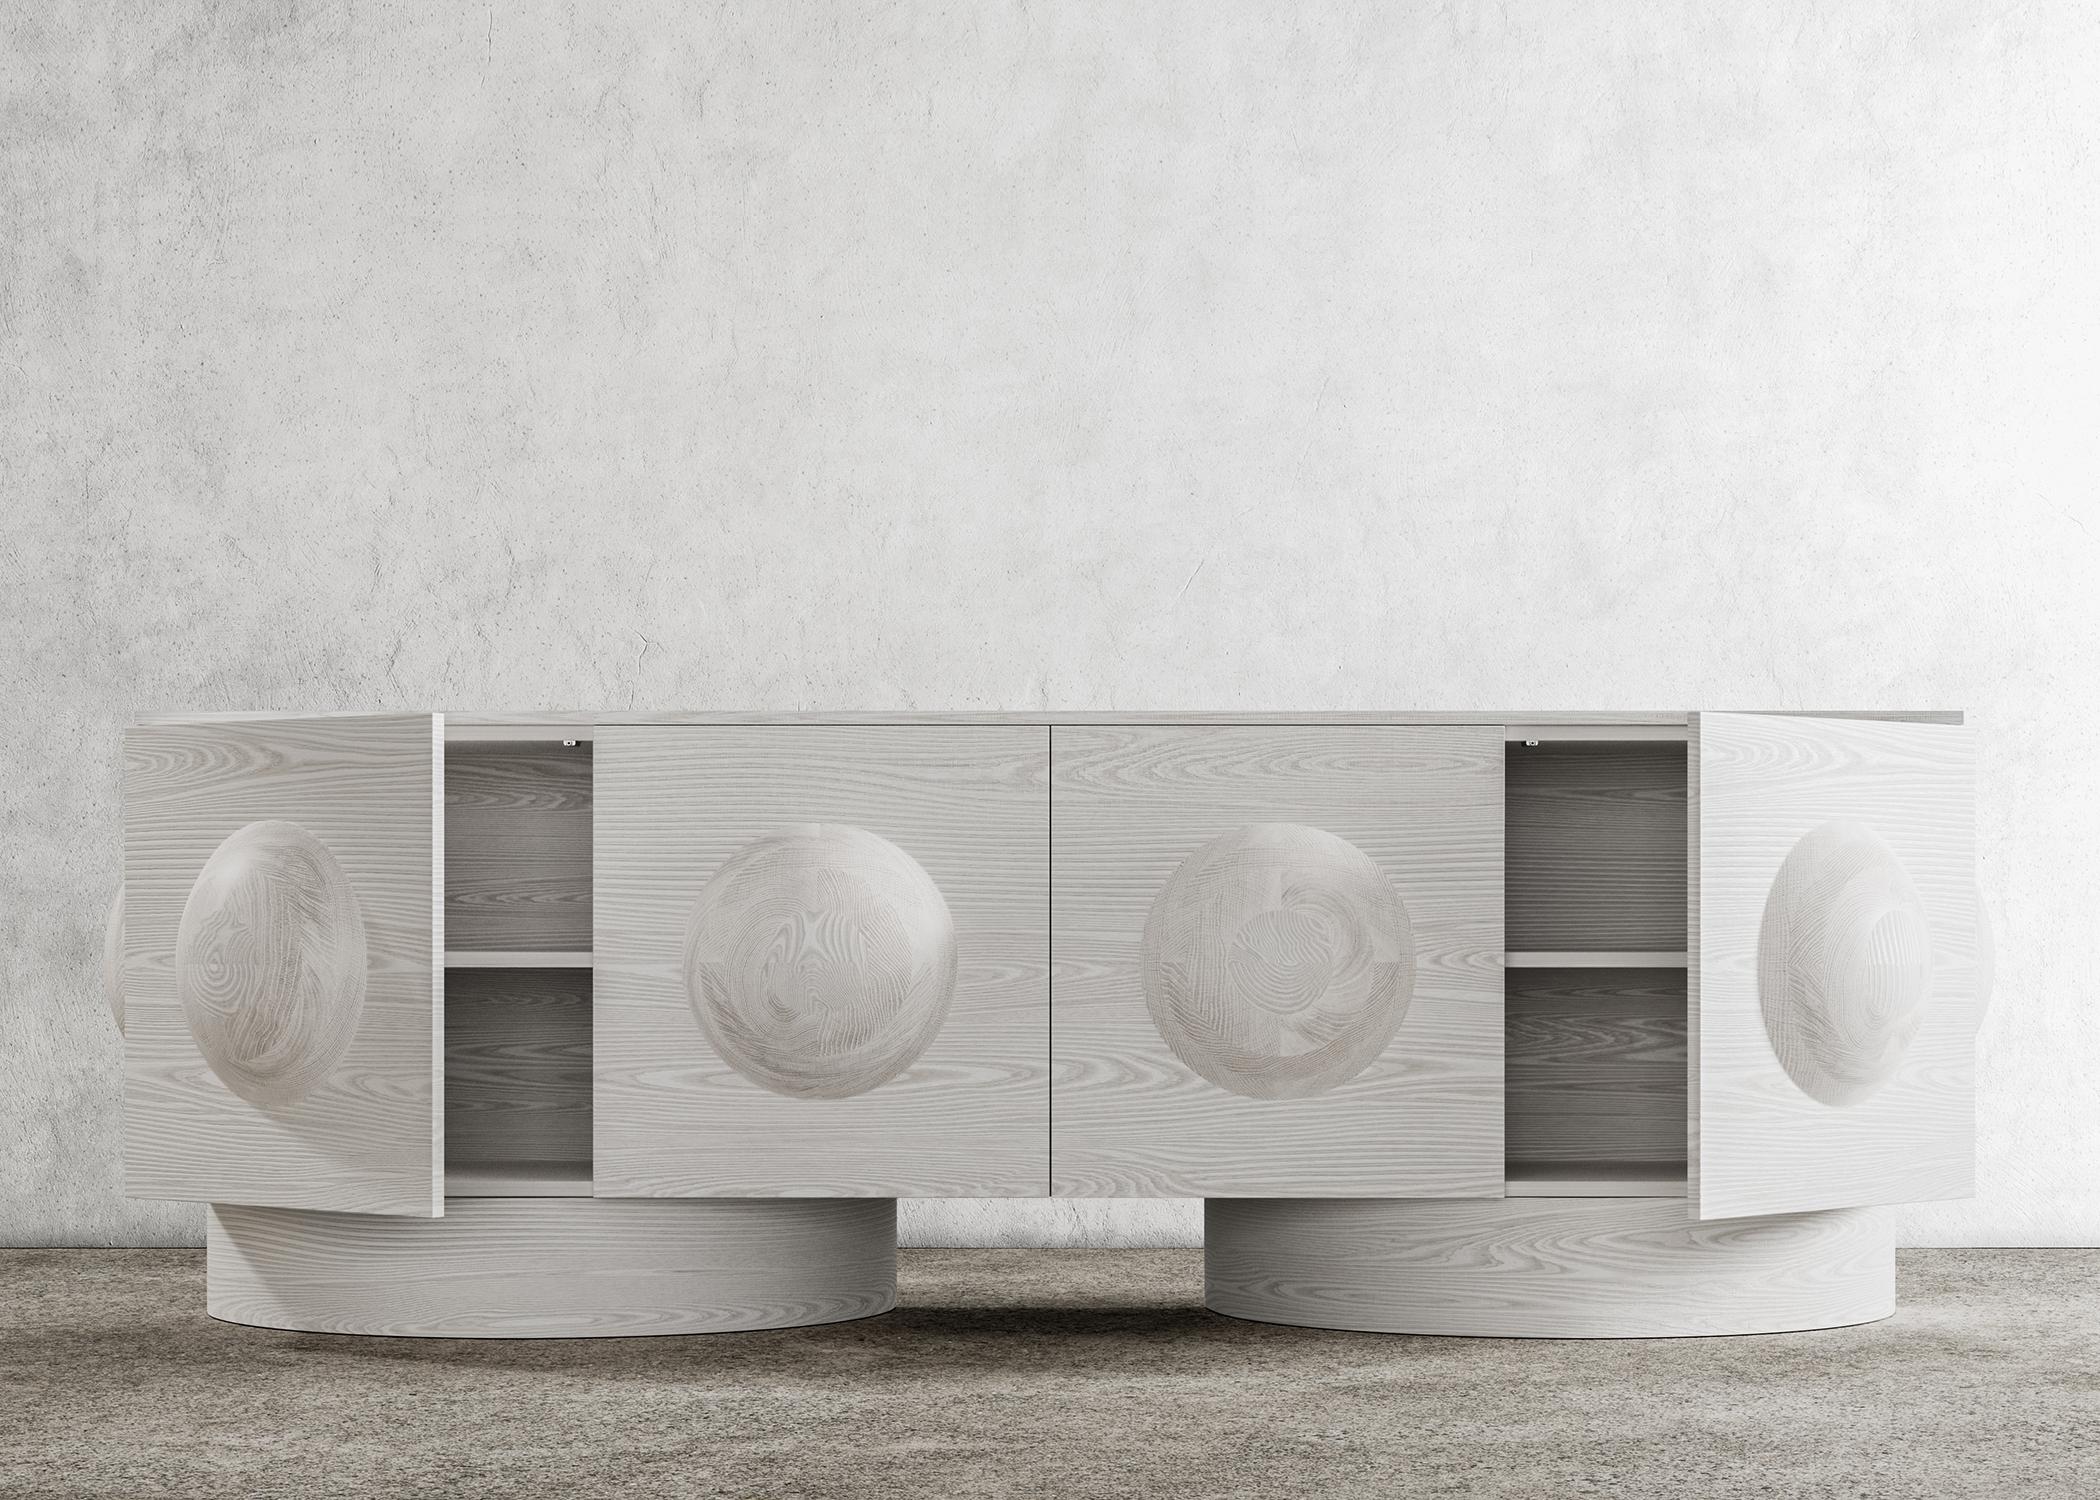 DOT CREDENZA - Modern Bleached White Oak Body and Base

The Dot Credenza is a contemporary piece of furniture with a unique design element - a sculpted wood sphere detail - and wood plinth bases, which give it an architectural feel. This modern